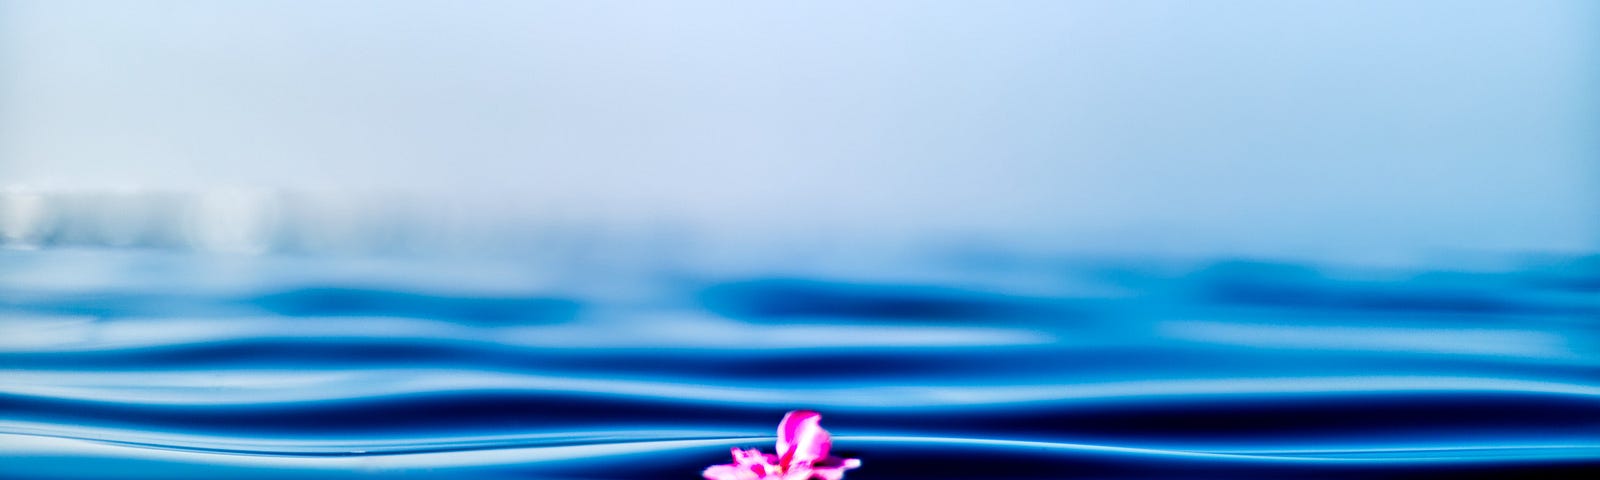 A flower blooming in middle of the waves in a sea signifying peace in the world